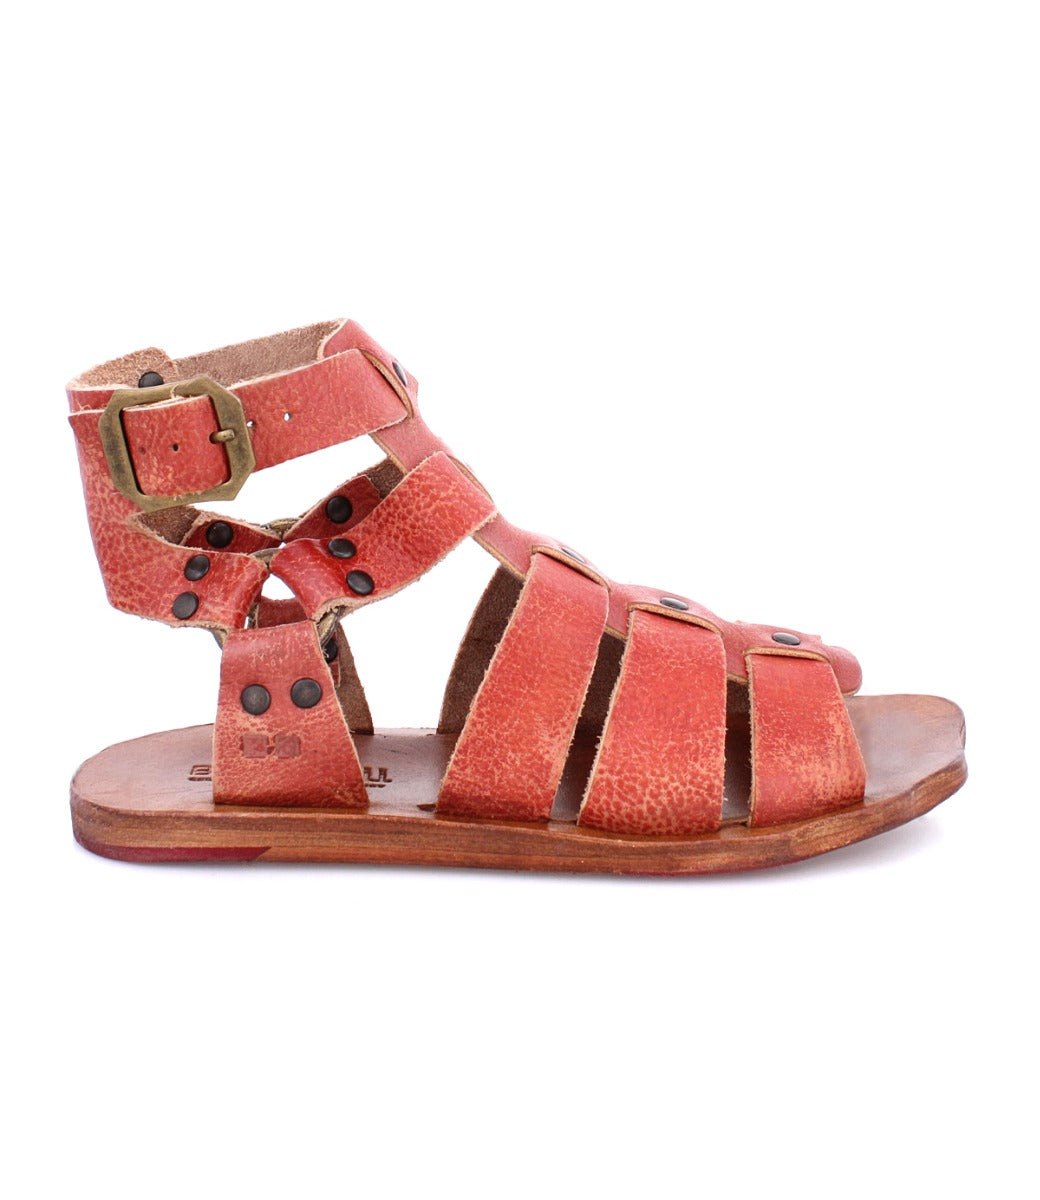 A women's Bed Stu Hera sandal with buckles and straps.